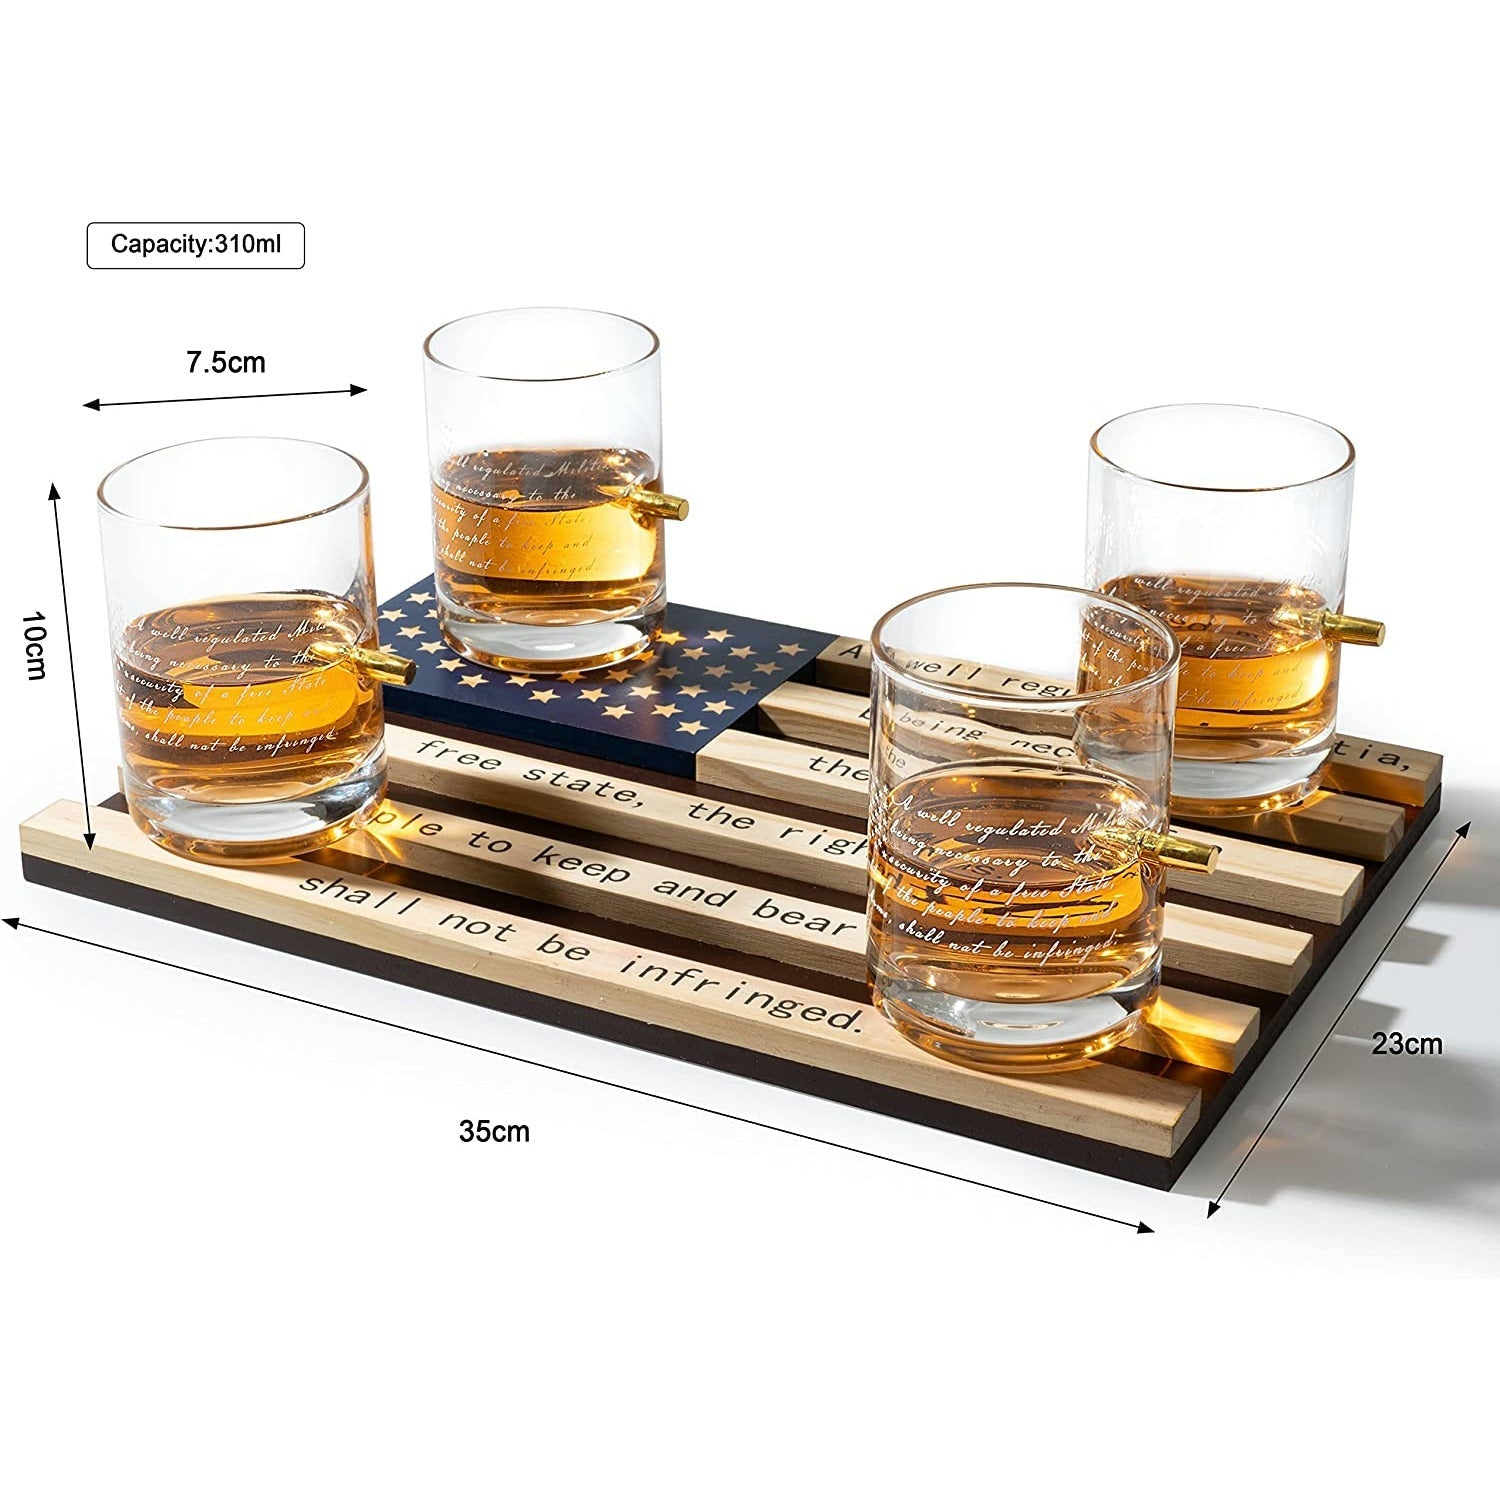 2nd Amendment American Flag Bullet Glasses .308 Real Solid Copper Projectile, Set of 4 Hand Blown Old Fashioned Whiskey Rocks Glasses, Wood Flag Tray with Patriots Gun Rights Law & Military Gift Set-6